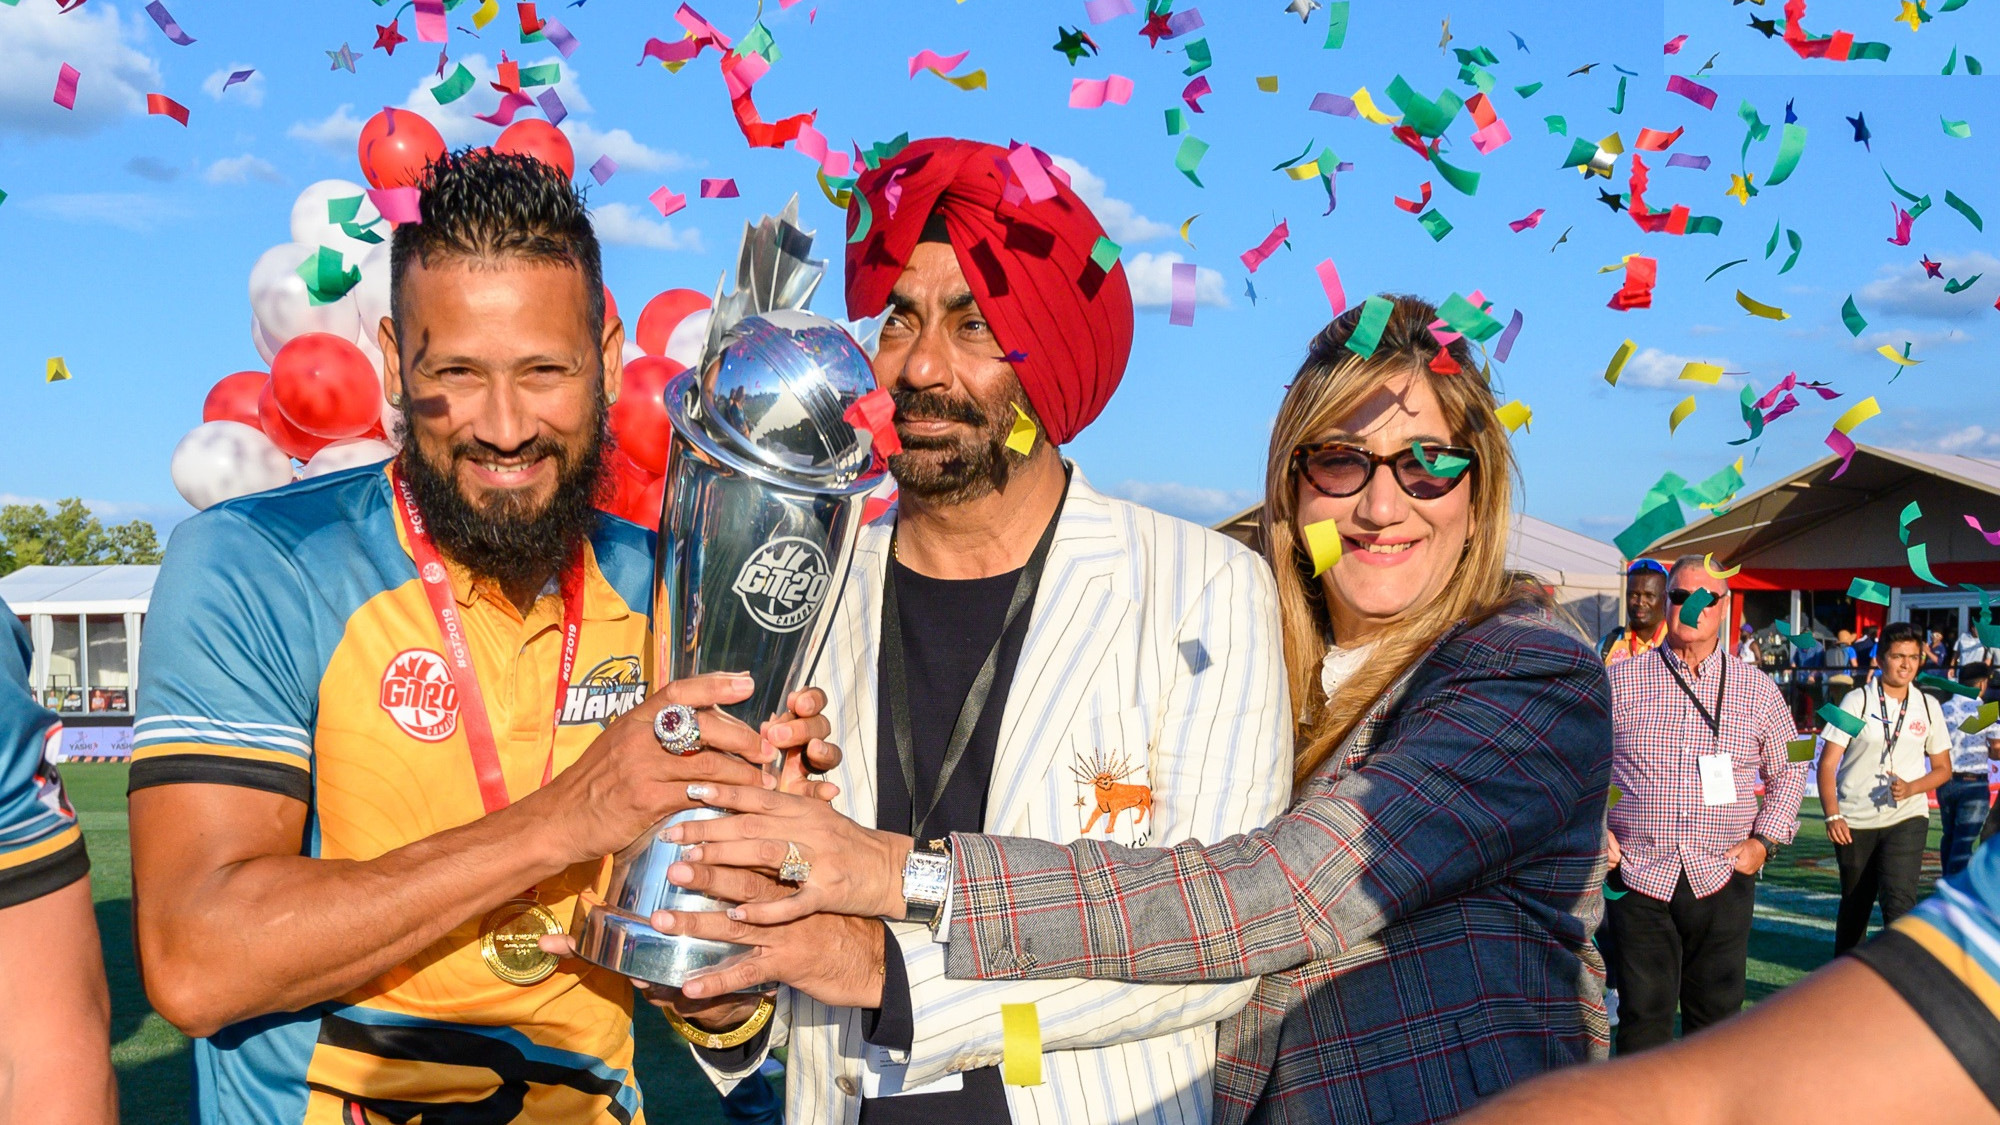 Global T20 Canada: Season 2 - Journey from an empty cornfield to an enthralling Super Over Final